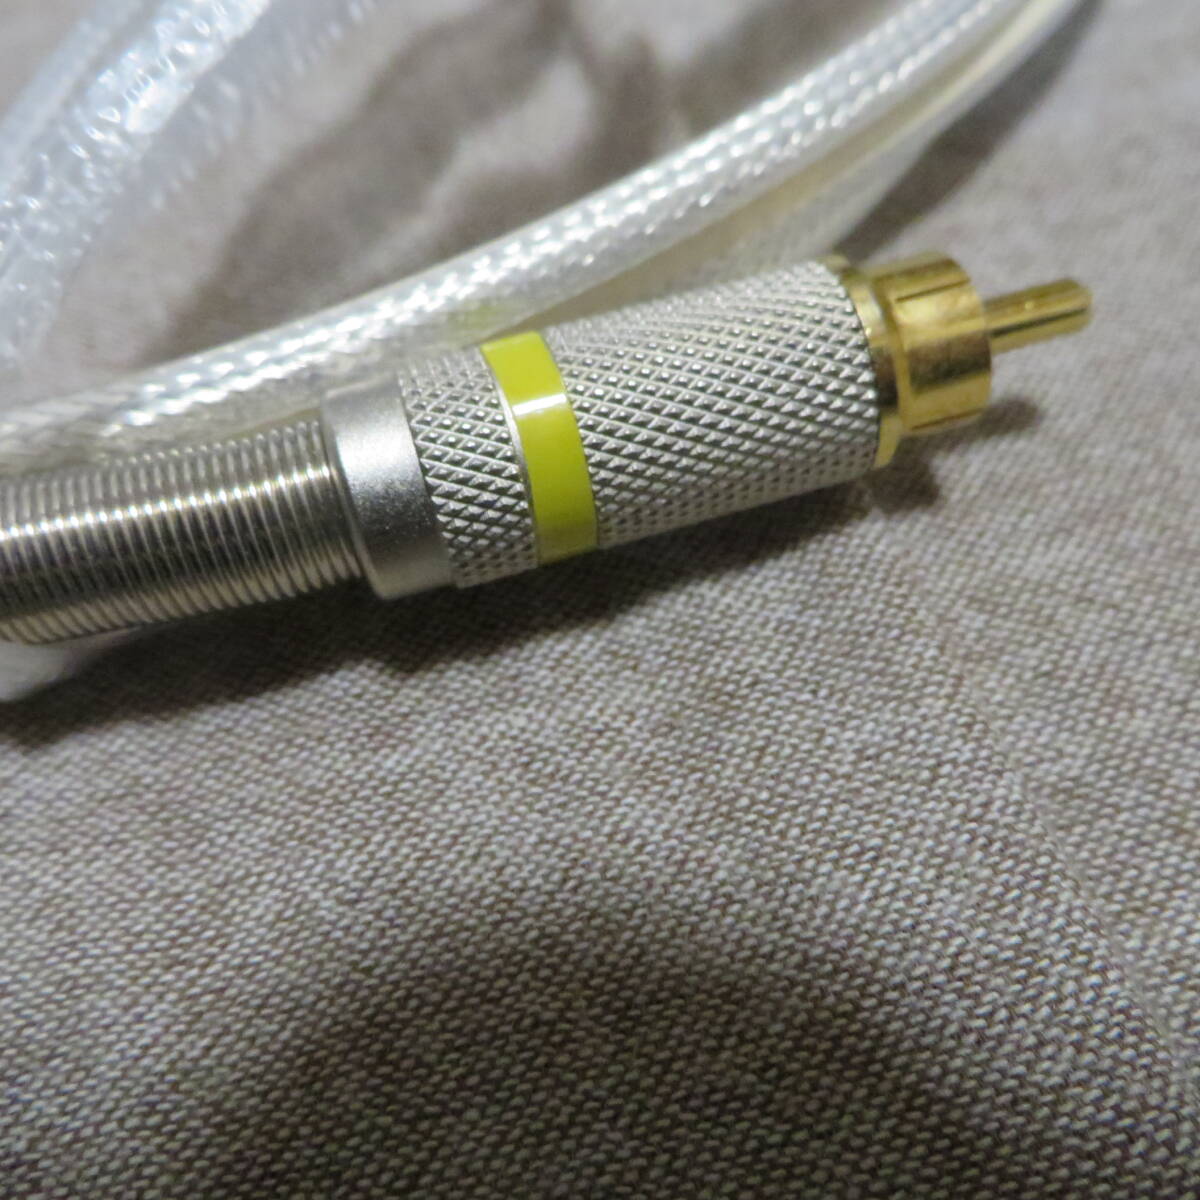  same axis digital cable,3.0m(300cm),10 year about before buying .. mono... through test OK.... liquidation 